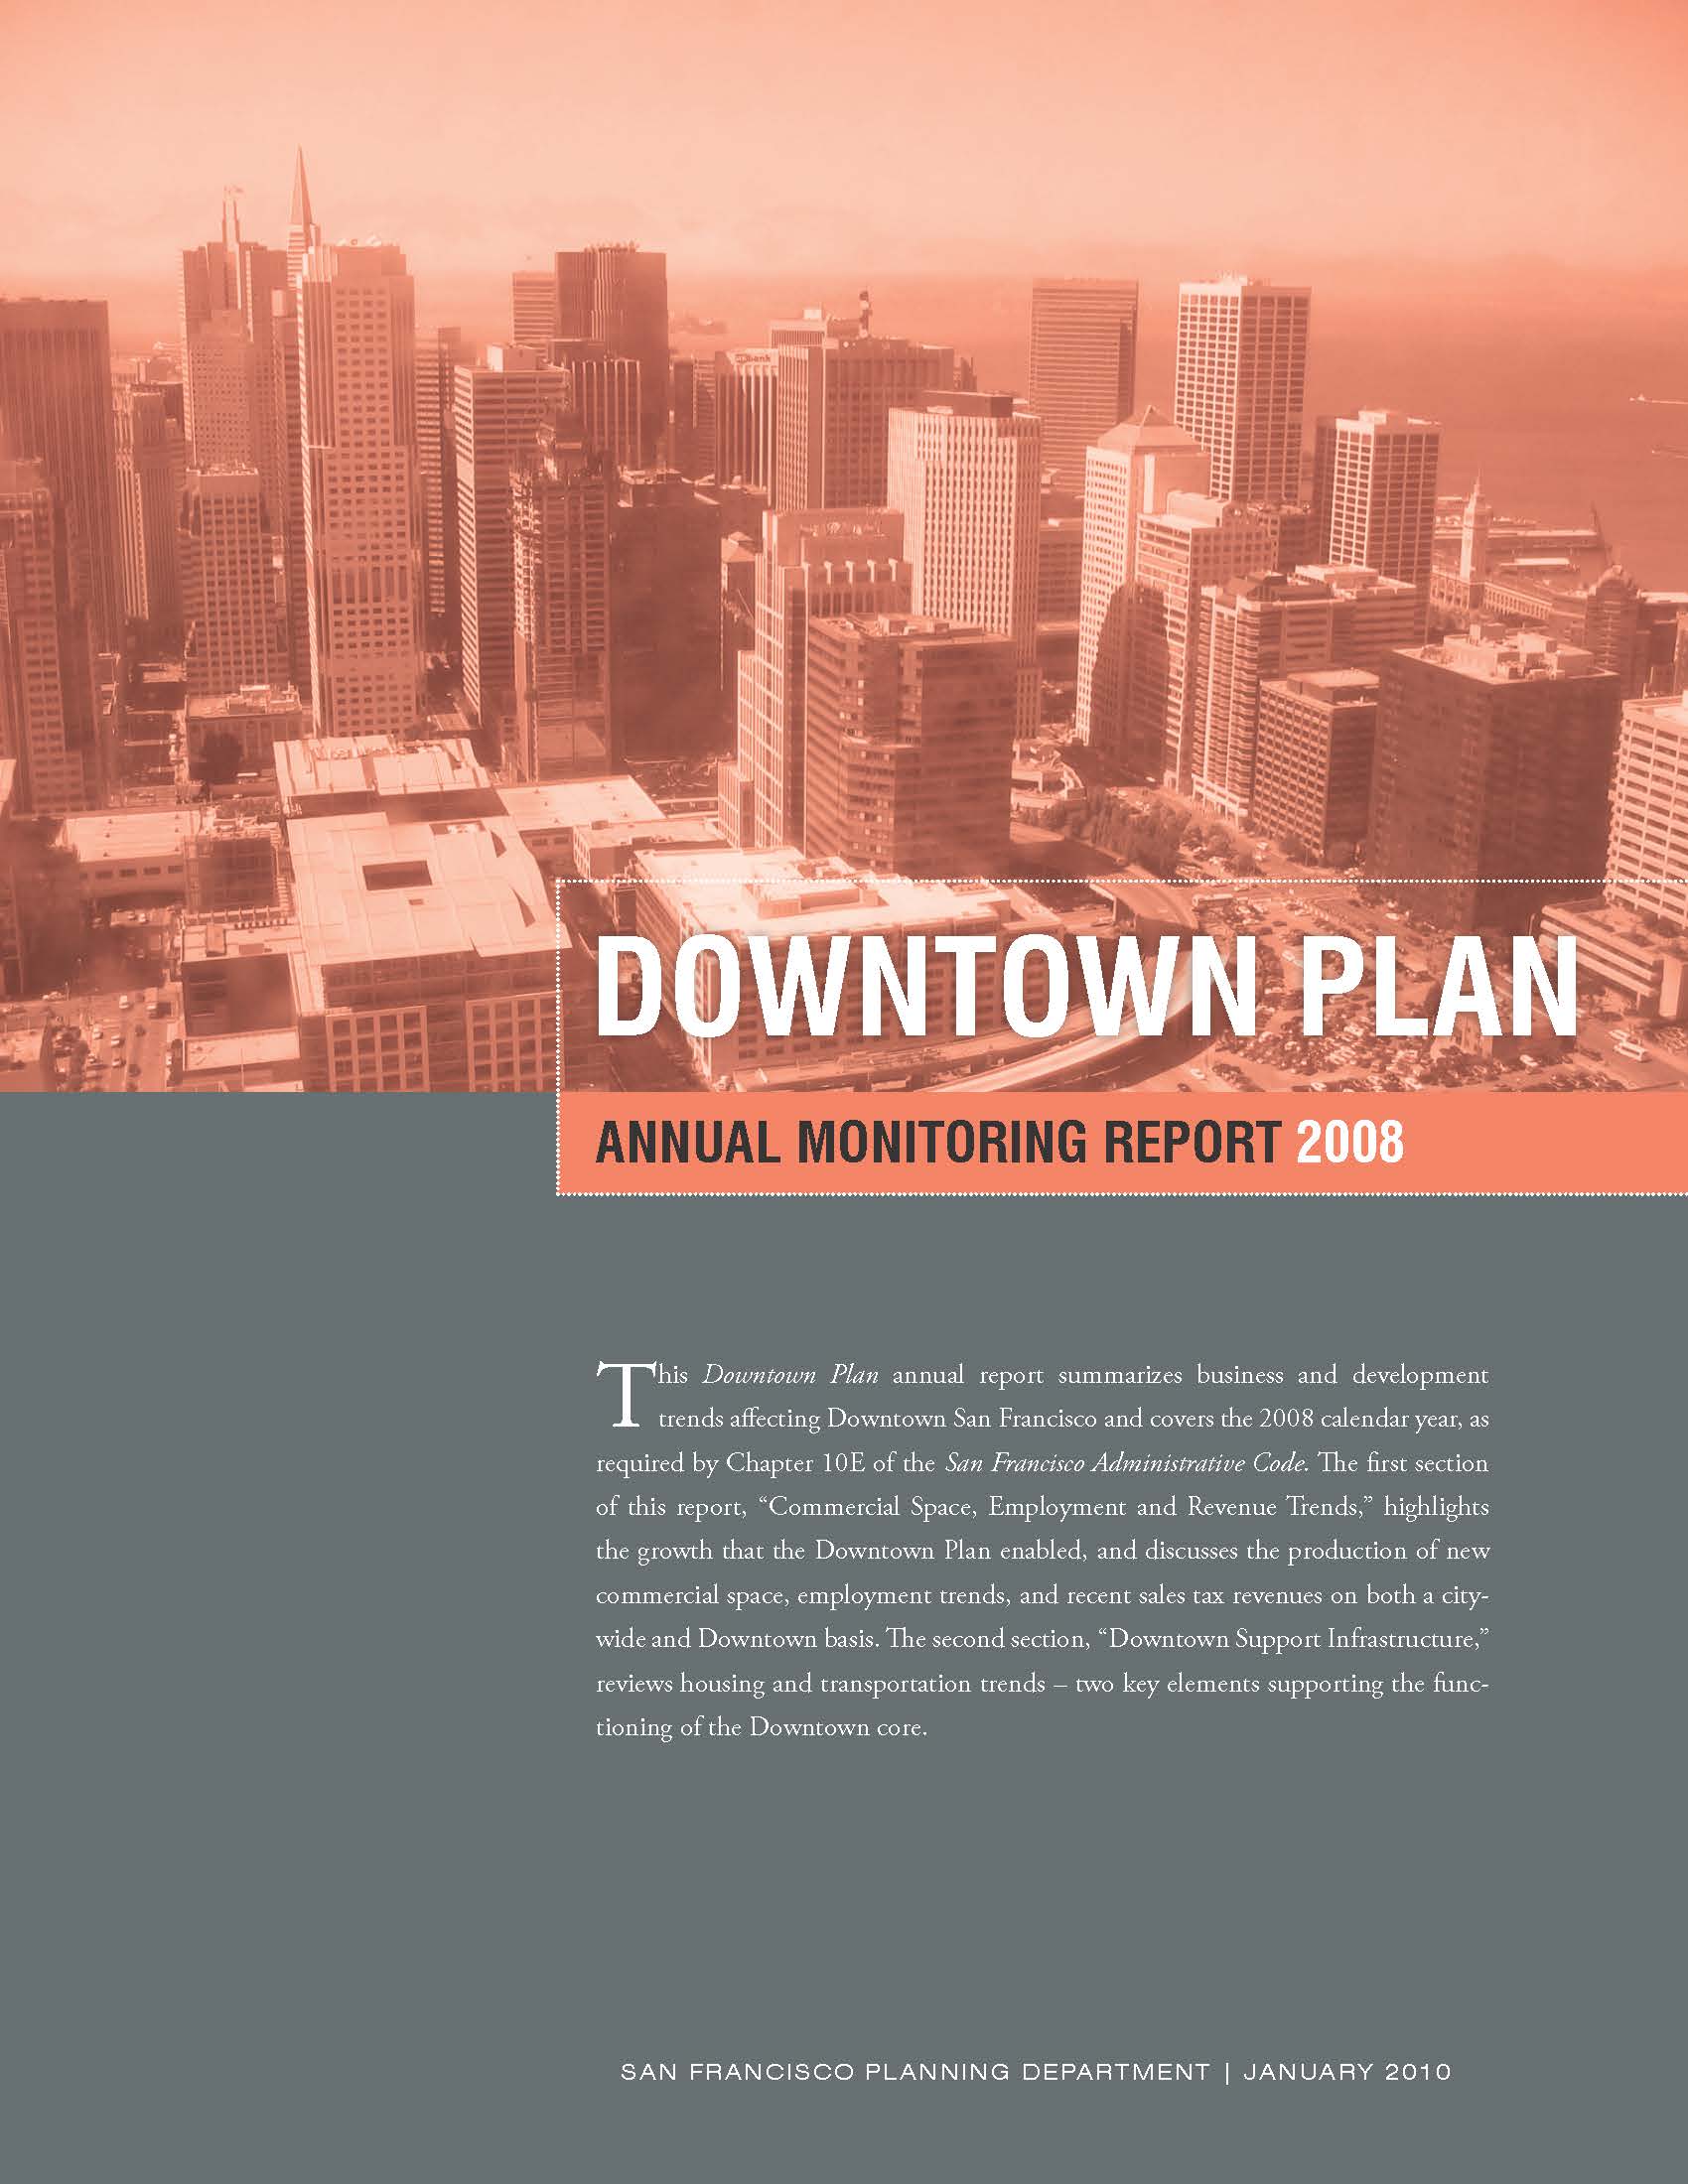 Cover Image for the Downtown Plan Monitoring Report 2008